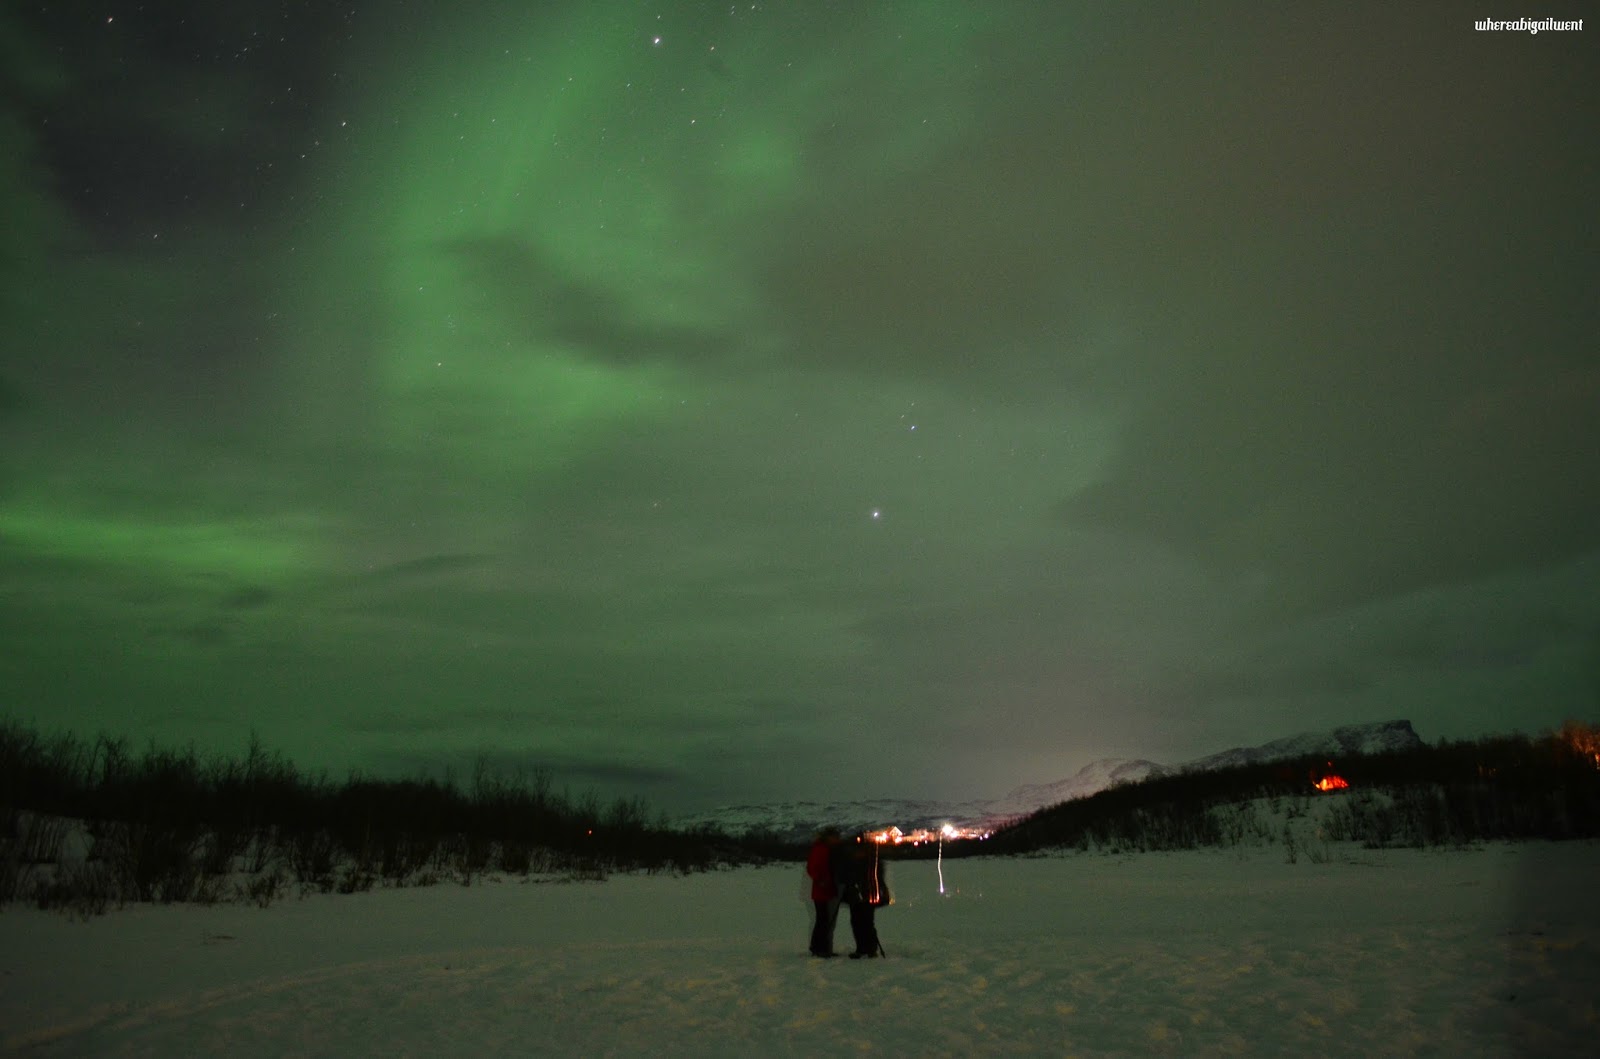 akademisk operation satellit Chasing the Aurora with Lights Over Lapland - Where Abigail Went